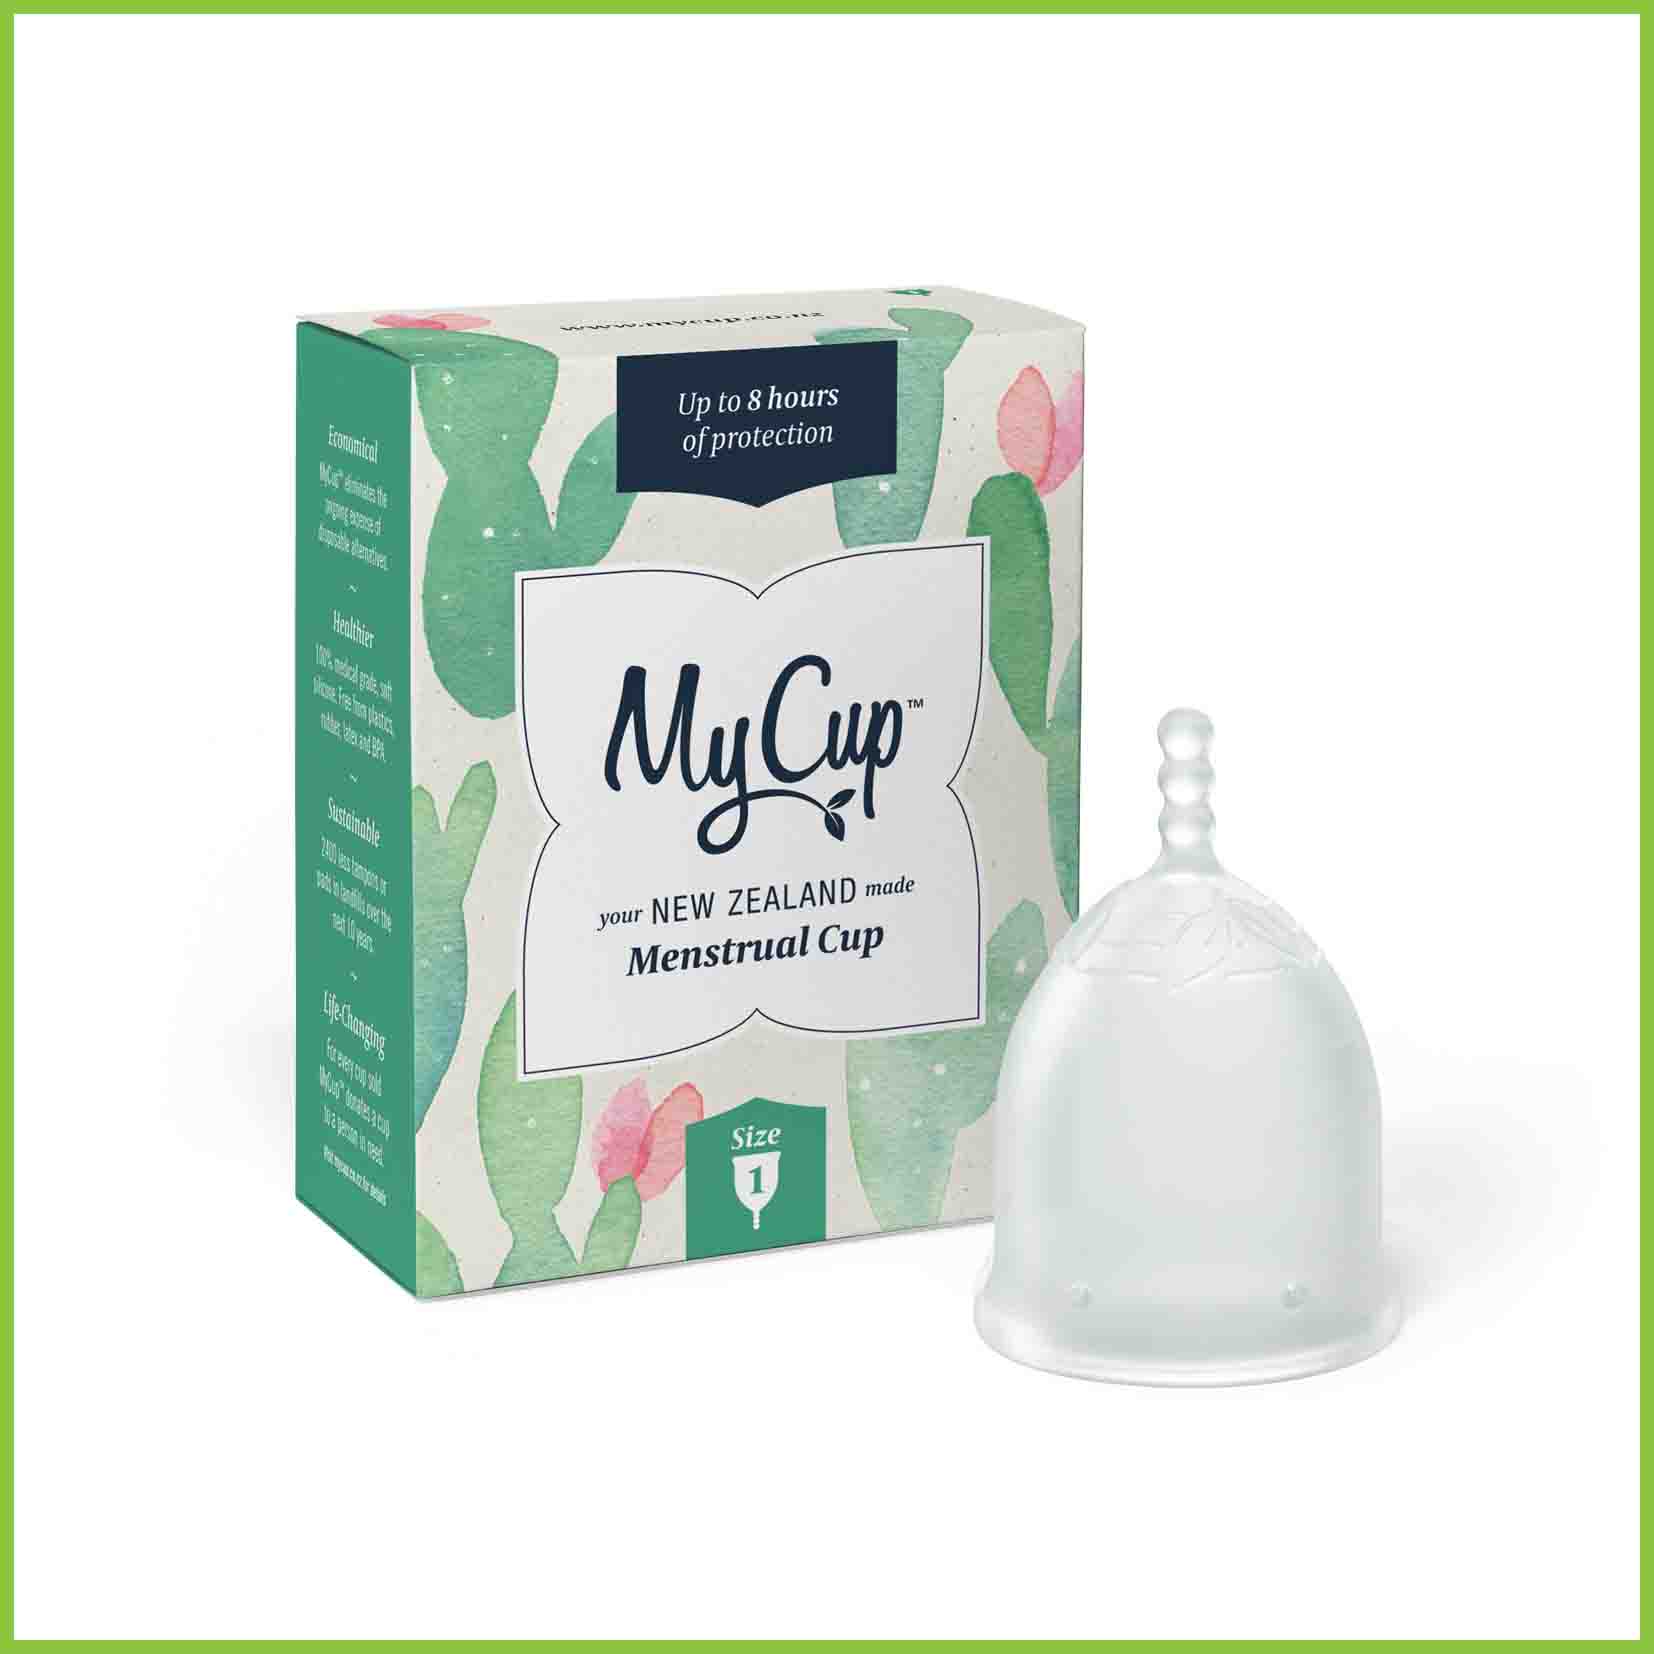 A size 1 menstrual cup from My Cup New Zealand